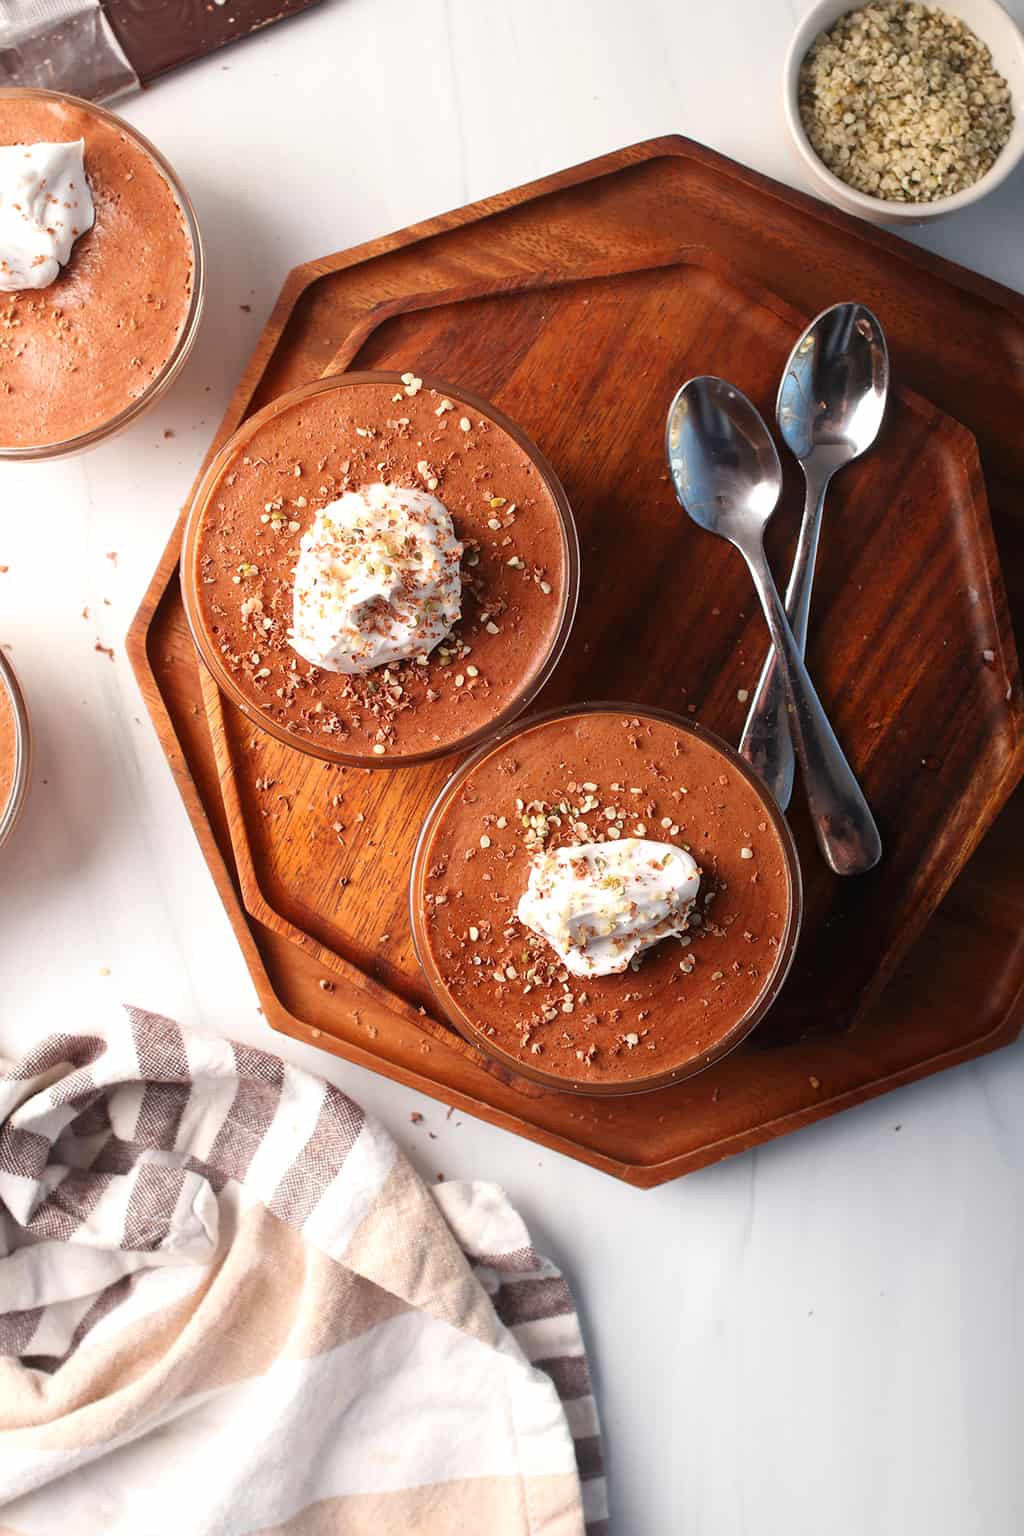 Two finished cups of vegan chocolate mousse on a wooden platter